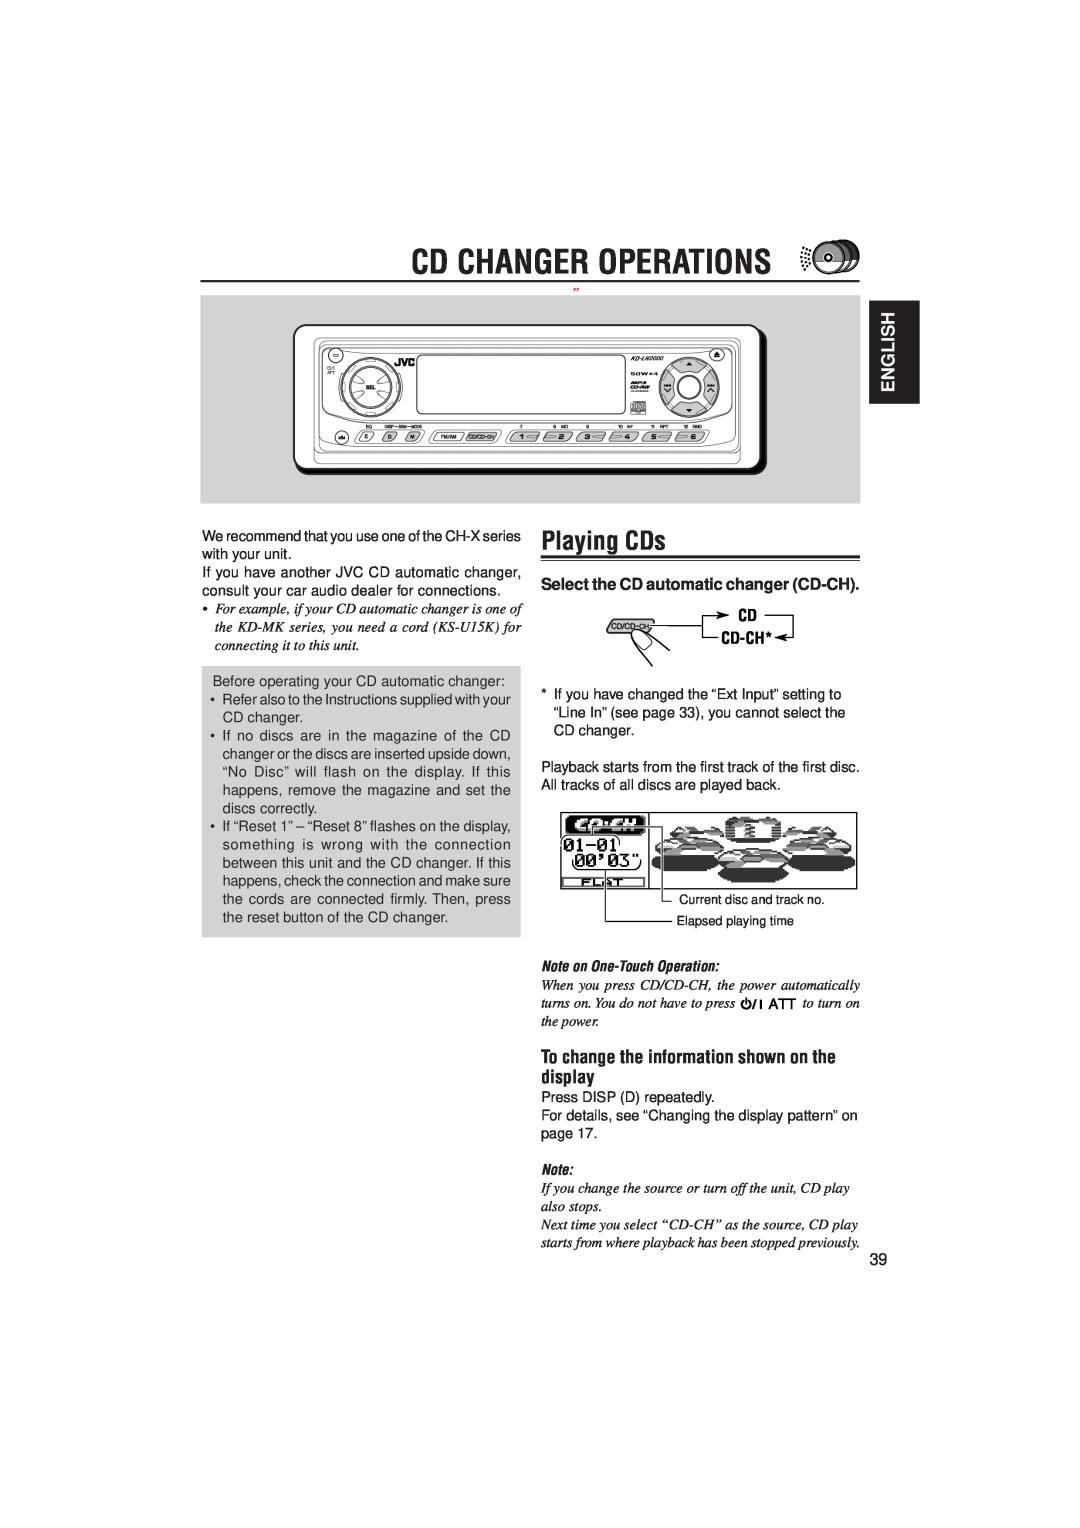 JVC IKD-LH2000 manual Cd Changer Operations, Playing CDs, English, To change the information shown on the display 